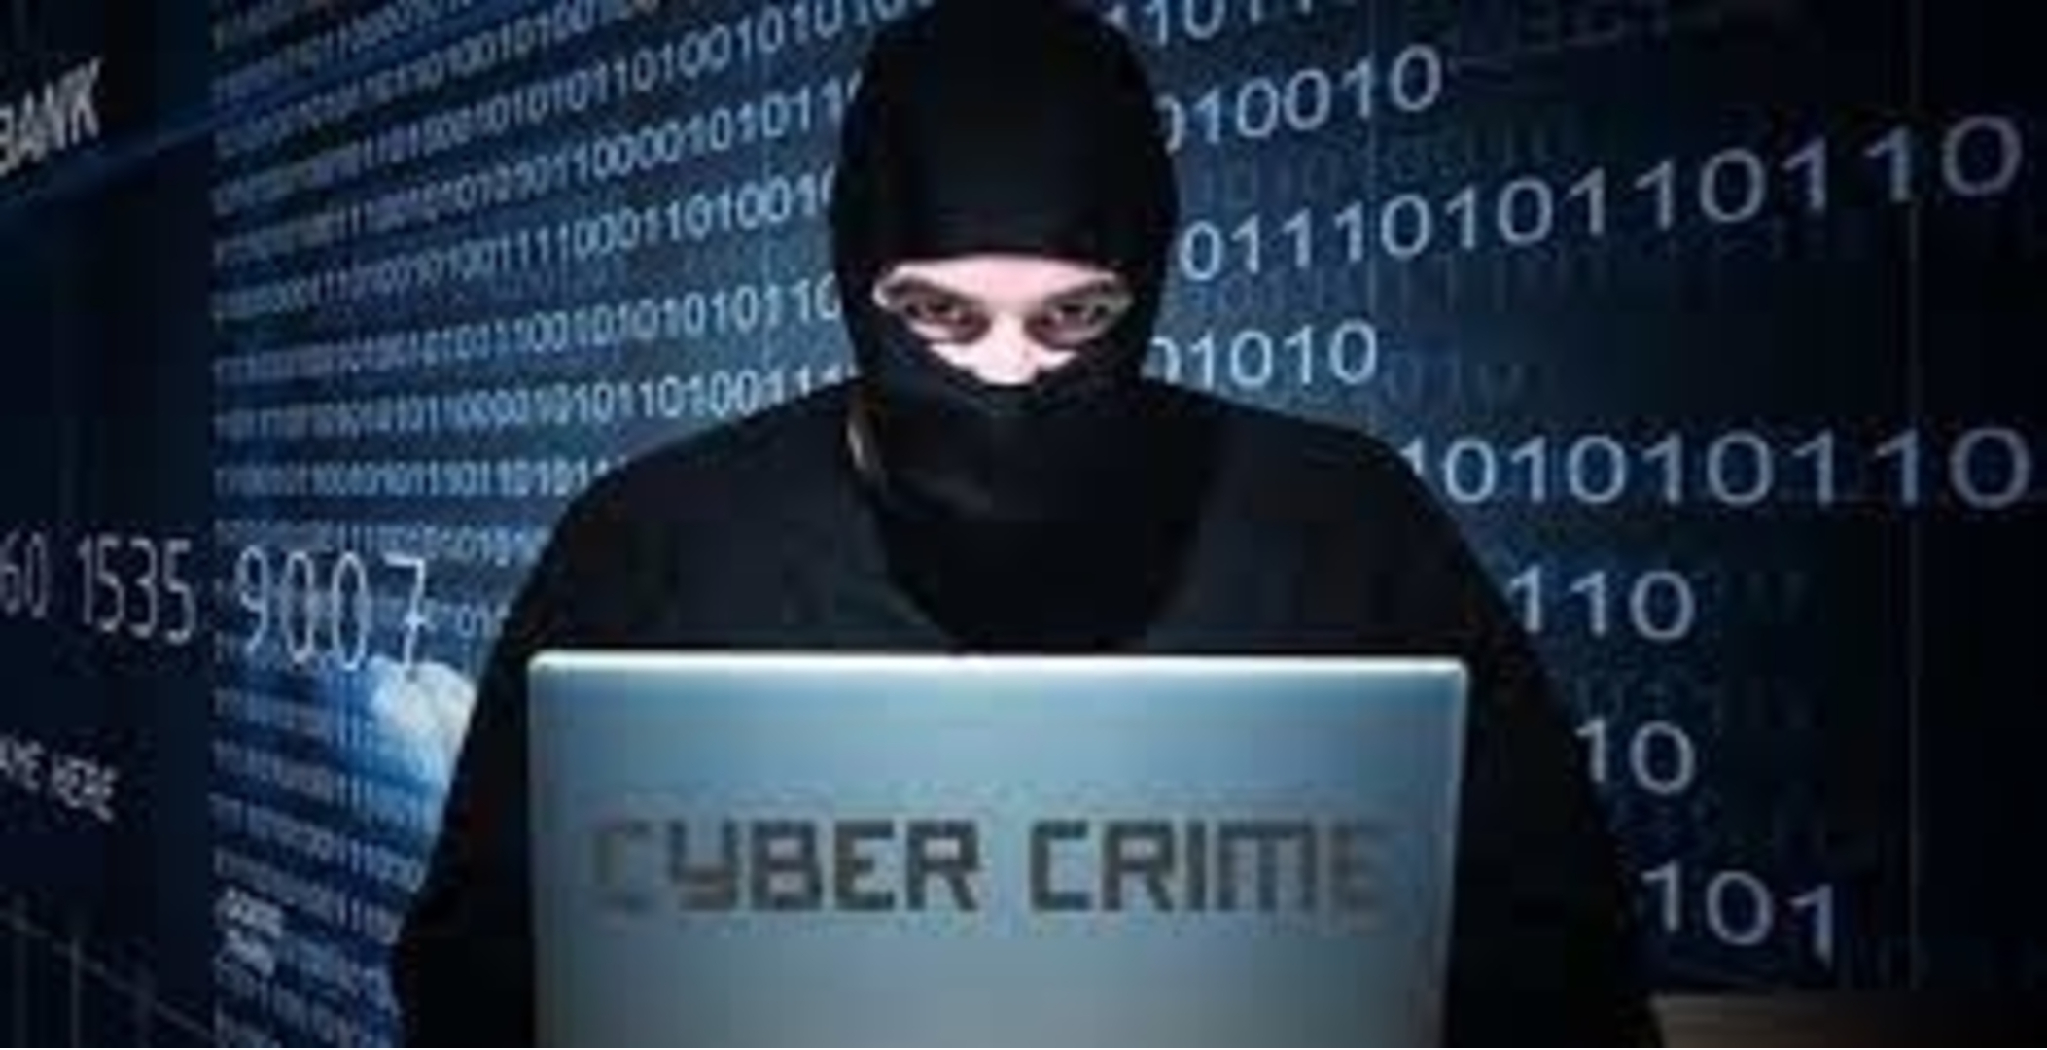 Online payment systems cyber crime